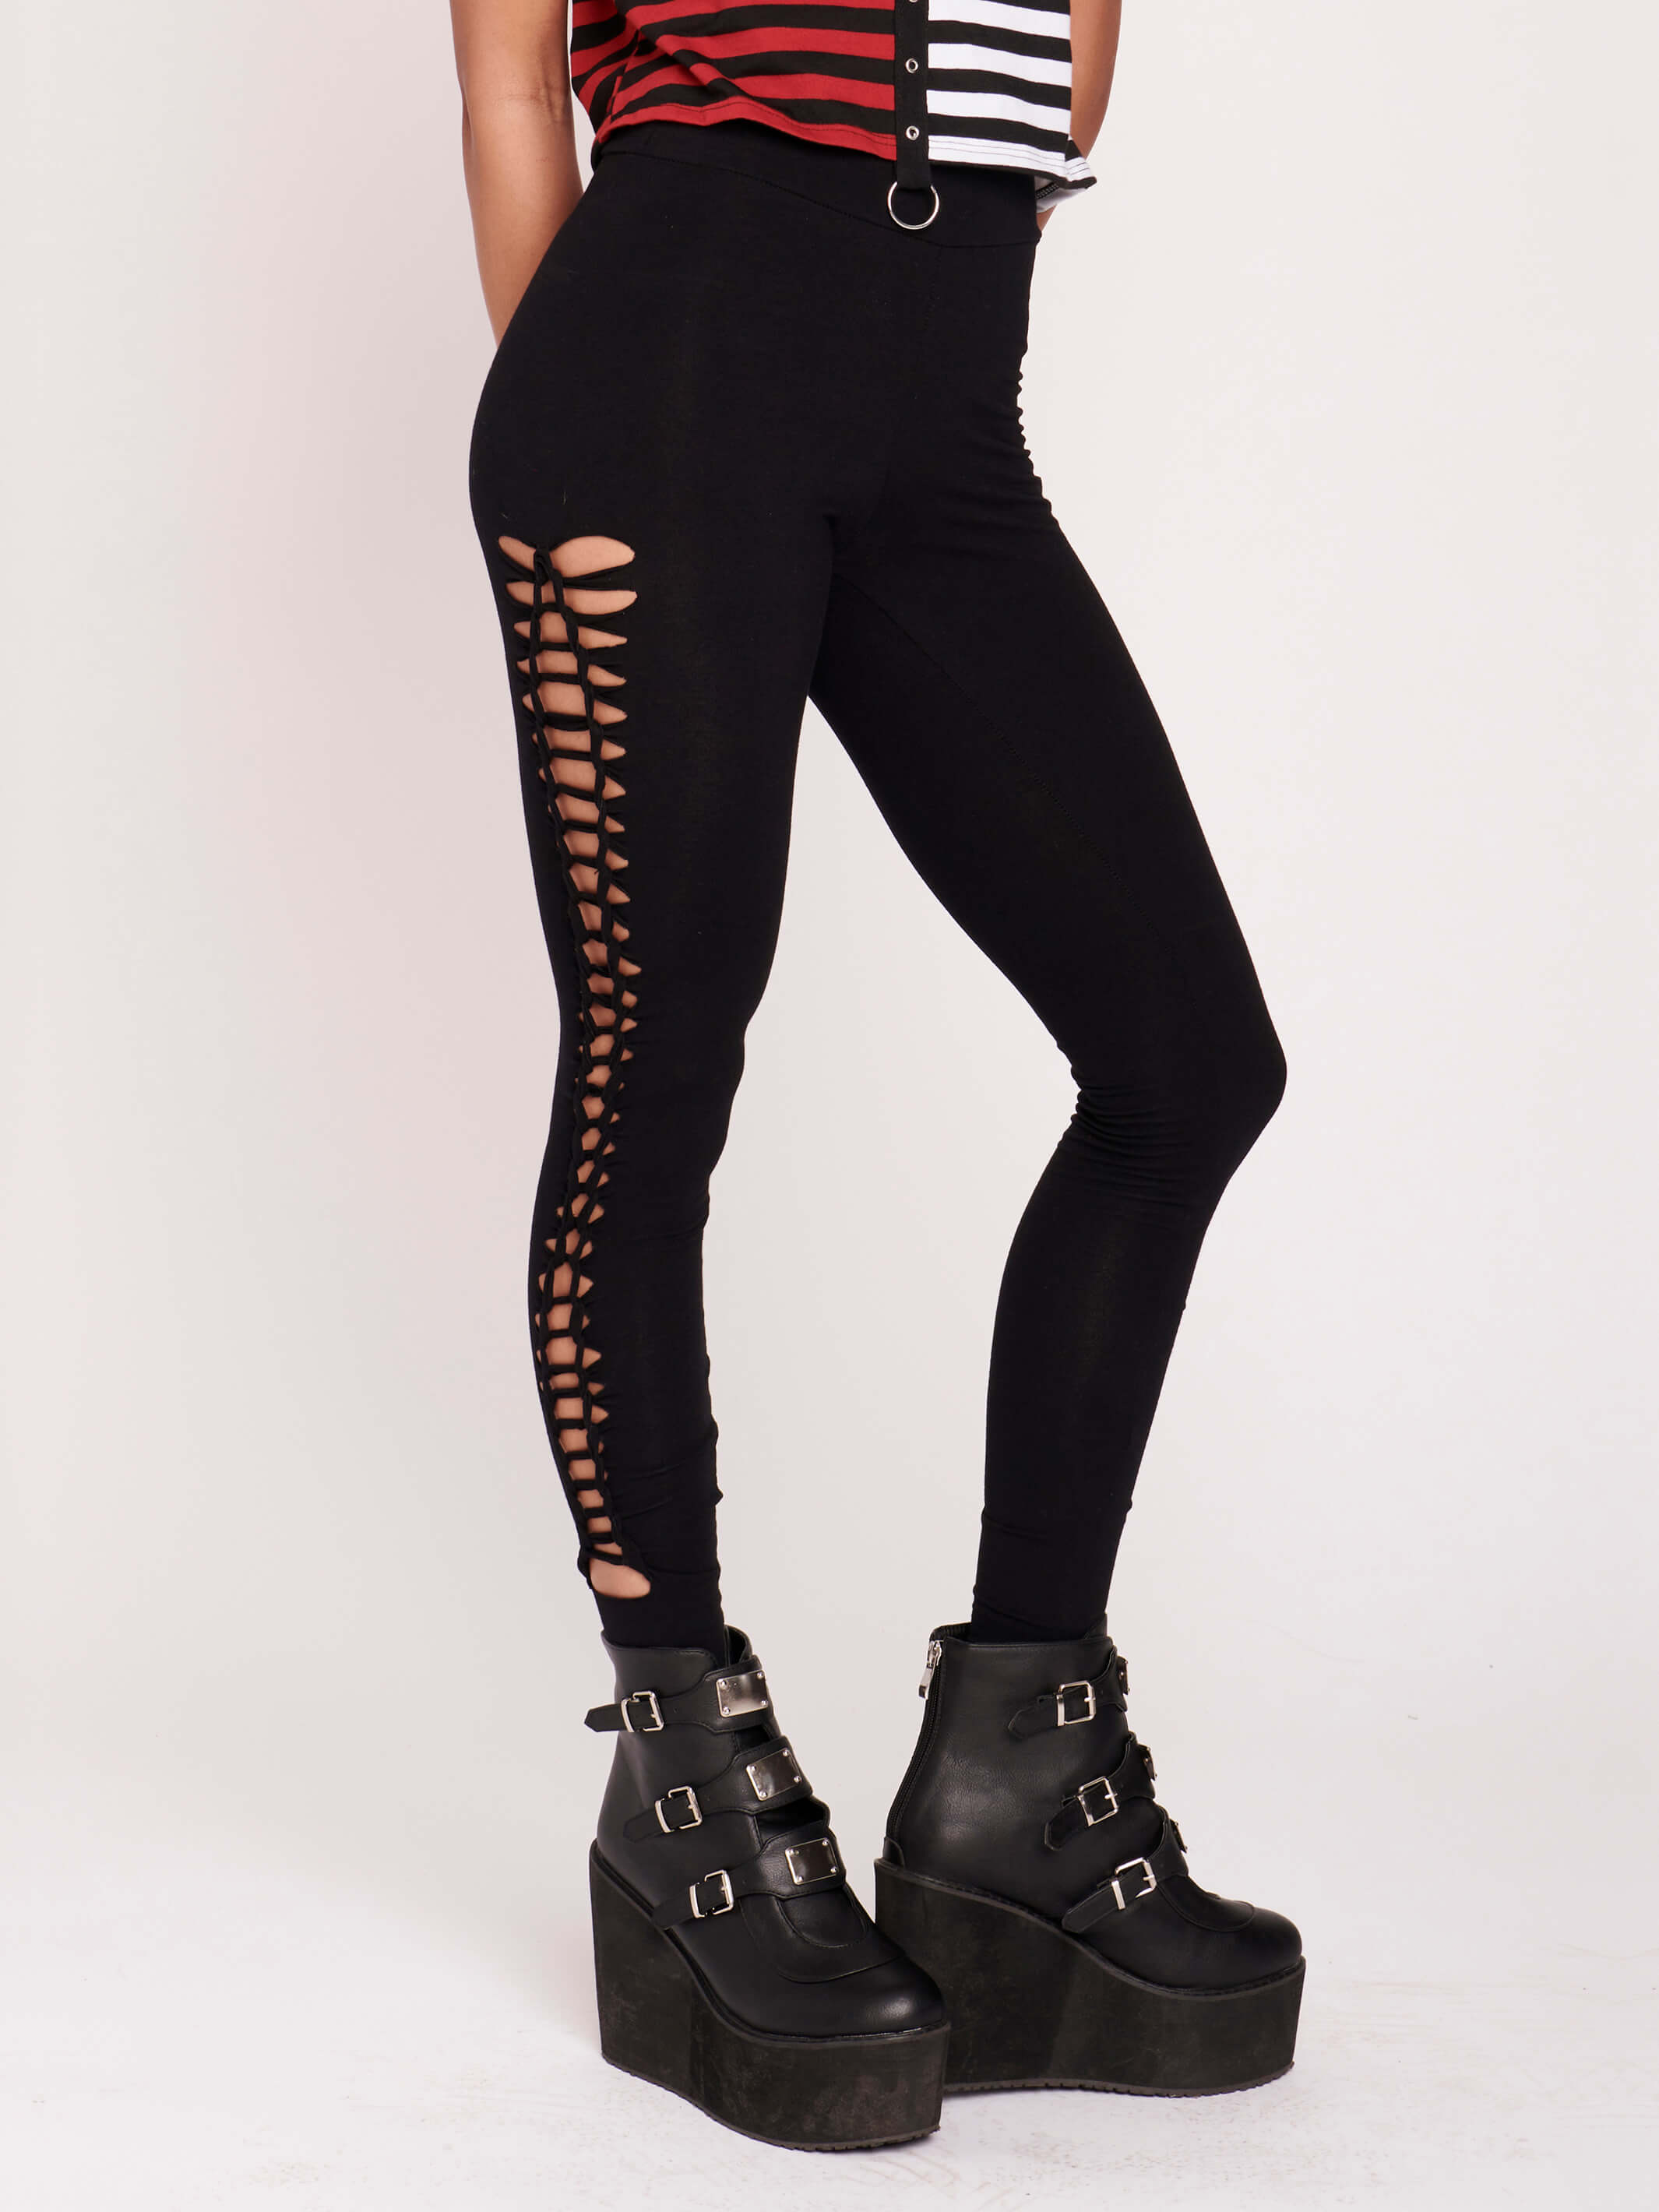 Stretchy cotton spandex leggings with slashed and braided side details. 